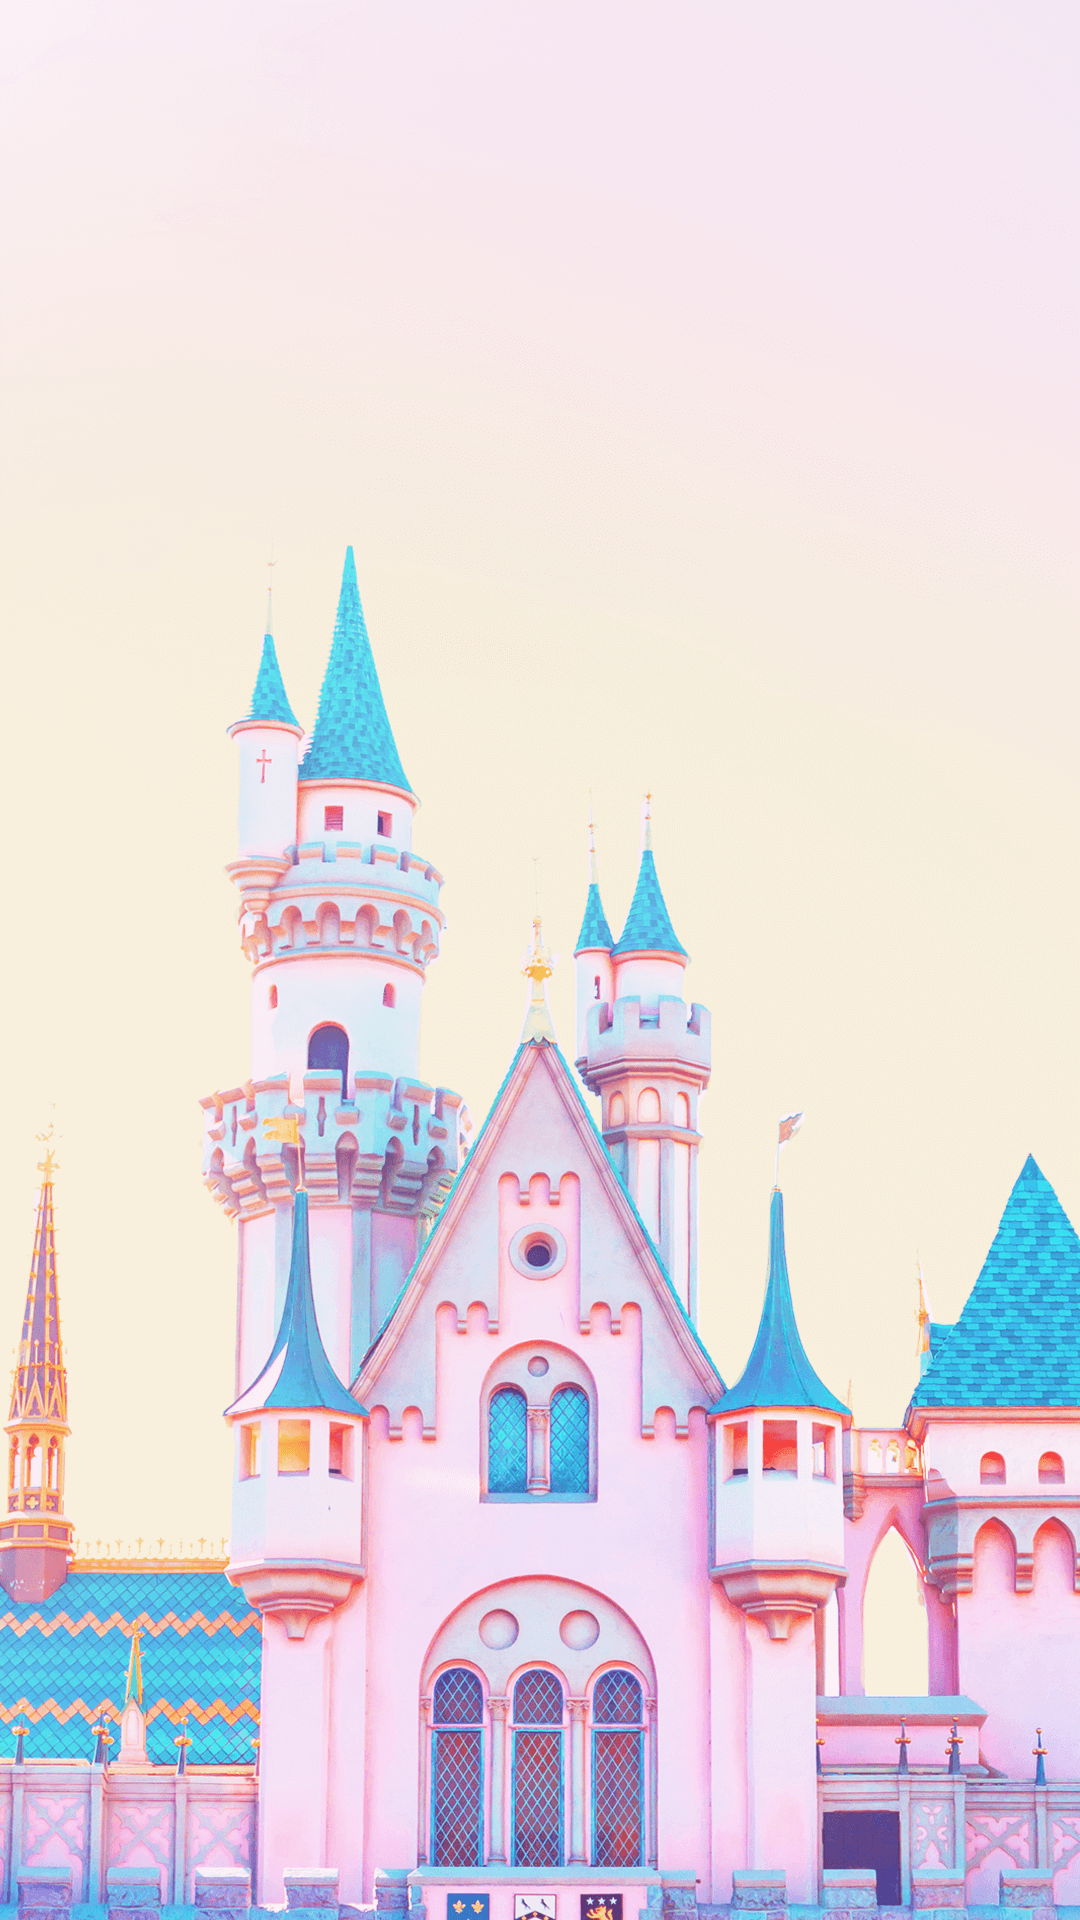 A pink castle with a sky background - Disneyland